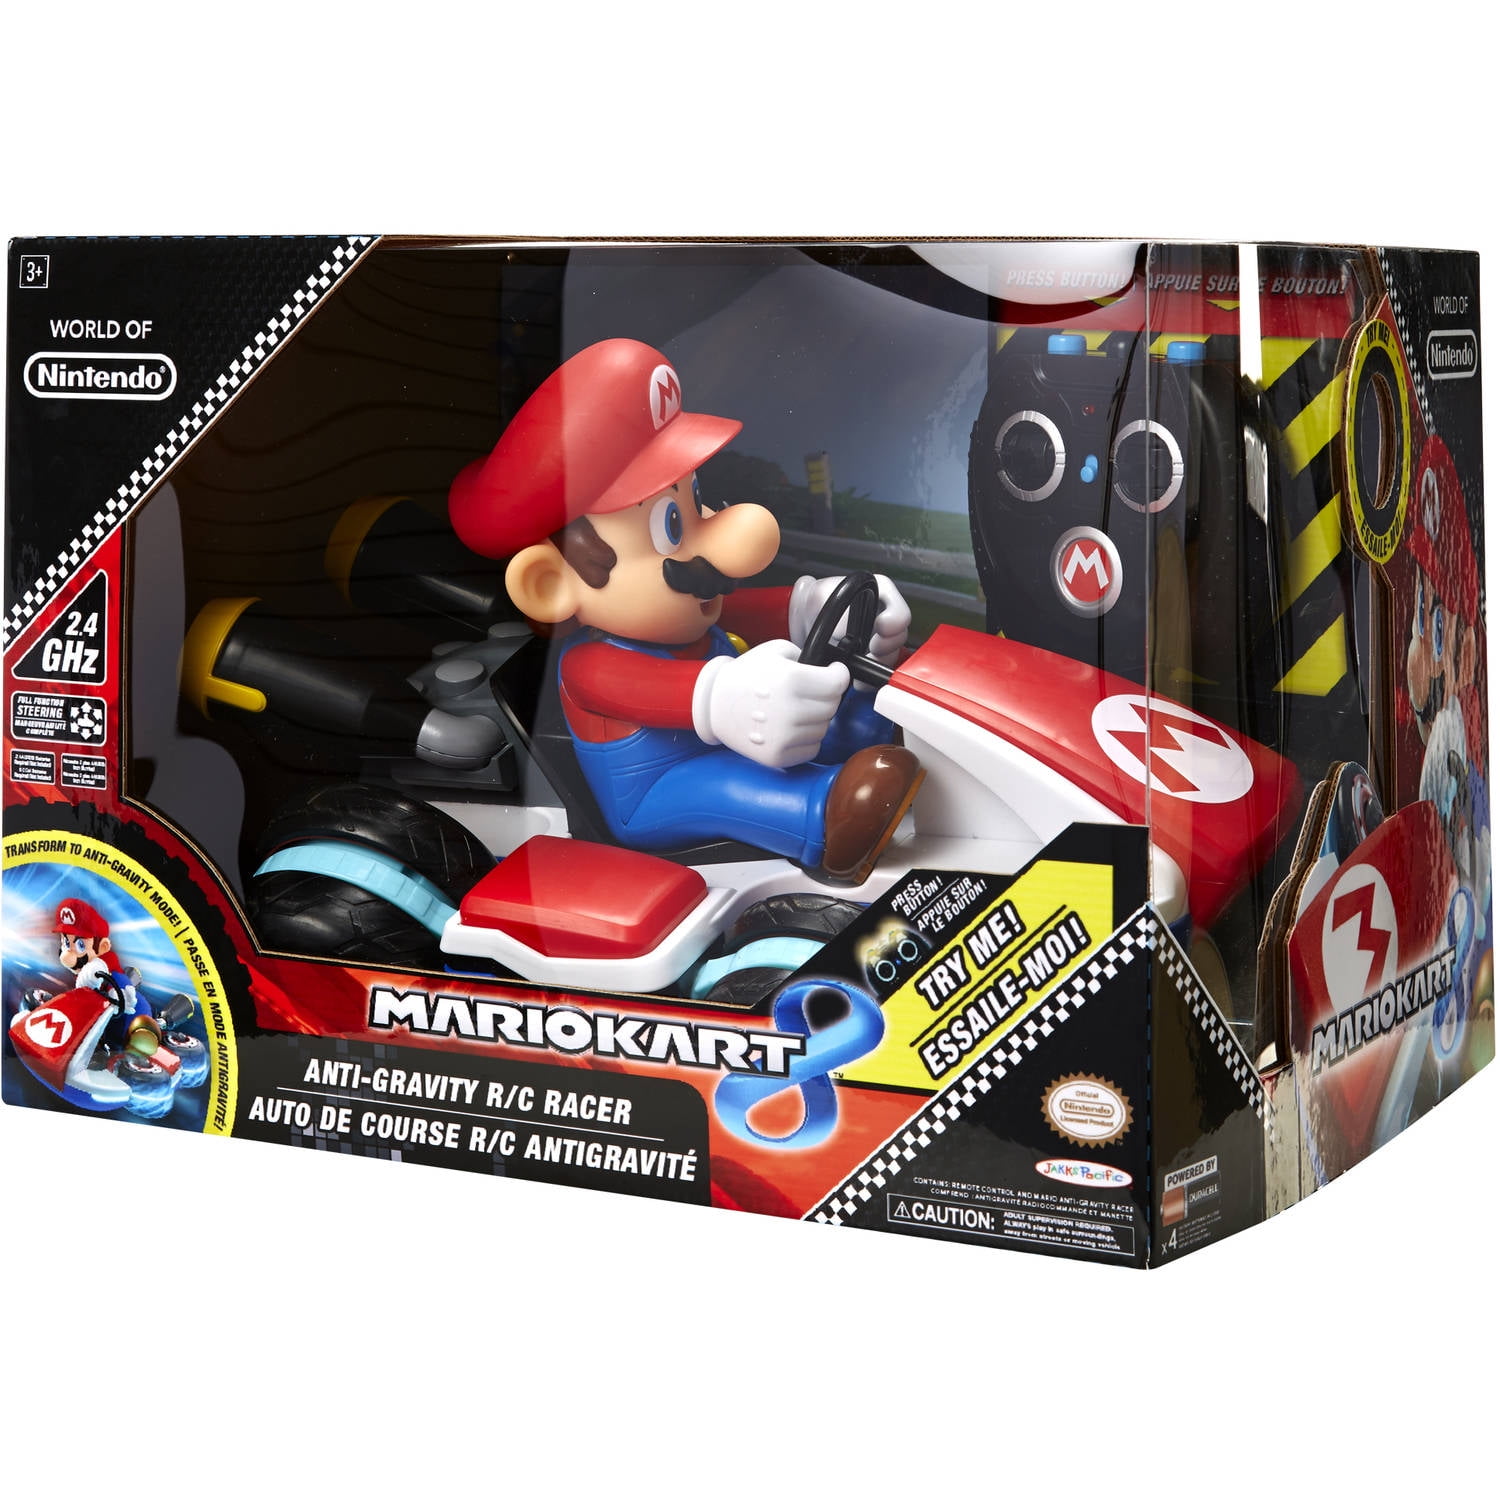 Nintendo brings Mario Kart into the real world with AR RC cars